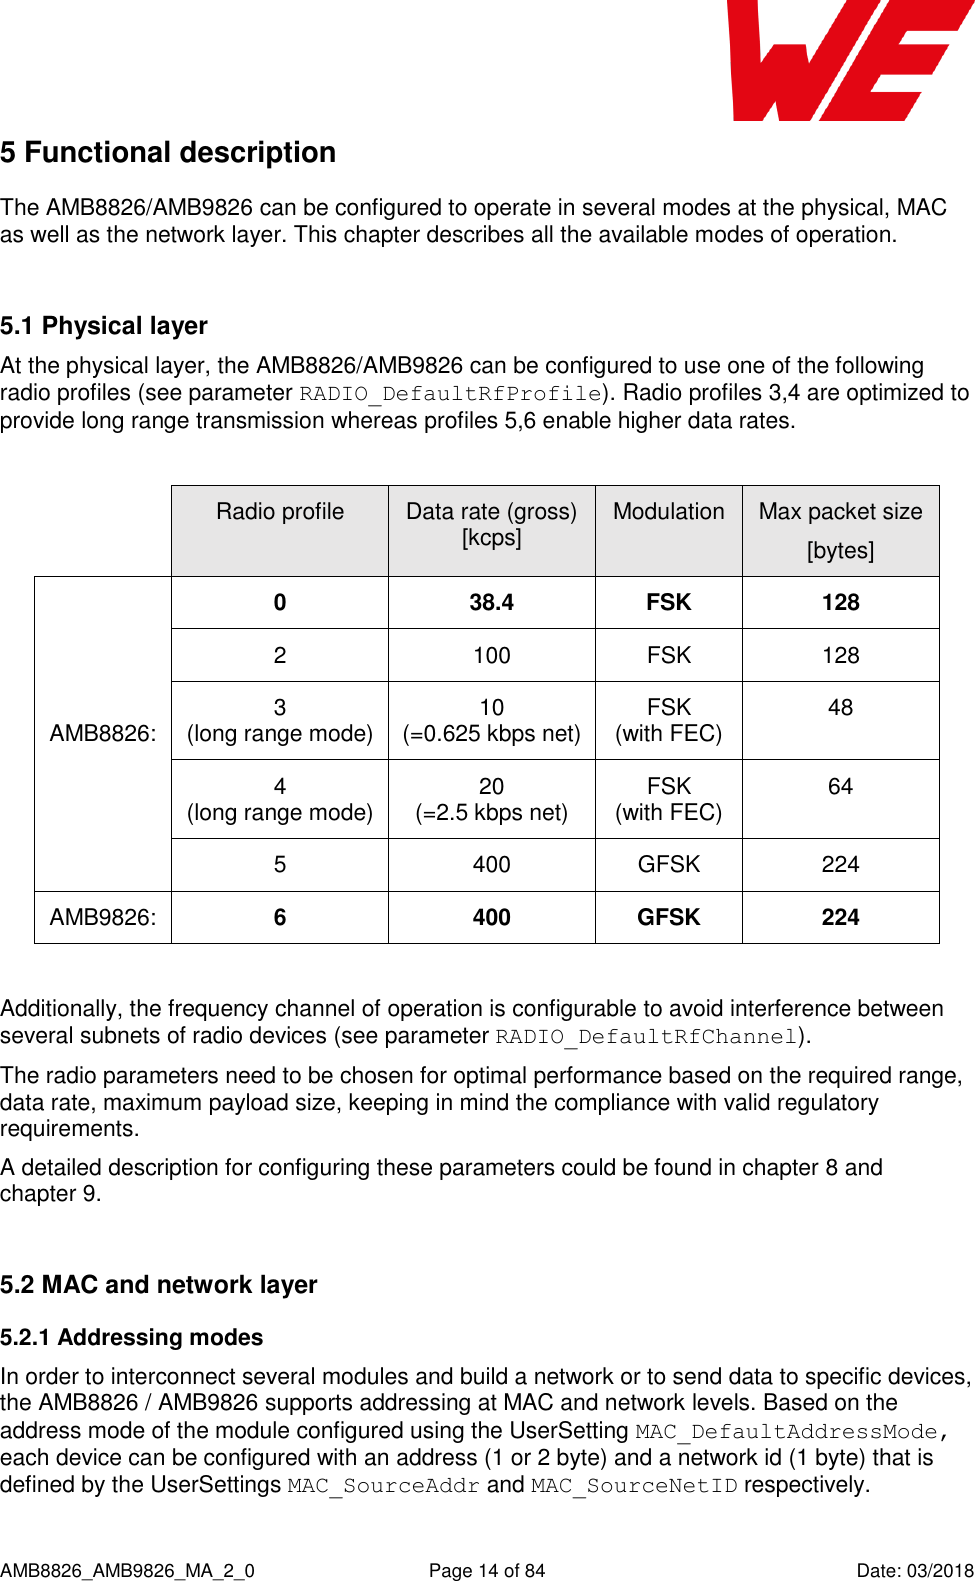      AMB8826_AMB9826_MA_2_0  Page 14 of 84  Date: 03/2018 5 Functional description The AMB8826/AMB9826 can be configured to operate in several modes at the physical, MAC as well as the network layer. This chapter describes all the available modes of operation.  5.1 Physical layer At the physical layer, the AMB8826/AMB9826 can be configured to use one of the following radio profiles (see parameter RADIO_DefaultRfProfile). Radio profiles 3,4 are optimized to provide long range transmission whereas profiles 5,6 enable higher data rates.   Radio profile Data rate (gross) [kcps] Modulation Max packet size [bytes] AMB8826: 0 38.4 FSK 128 2 100 FSK 128 3 (long range mode) 10 (=0.625 kbps net) FSK (with FEC) 48 4 (long range mode) 20 (=2.5 kbps net) FSK (with FEC) 64 5 400 GFSK 224 AMB9826: 6 400 GFSK 224  Additionally, the frequency channel of operation is configurable to avoid interference between several subnets of radio devices (see parameter RADIO_DefaultRfChannel).  The radio parameters need to be chosen for optimal performance based on the required range, data rate, maximum payload size, keeping in mind the compliance with valid regulatory requirements. A detailed description for configuring these parameters could be found in chapter 8 and chapter 9.  5.2 MAC and network layer 5.2.1 Addressing modes In order to interconnect several modules and build a network or to send data to specific devices, the AMB8826 / AMB9826 supports addressing at MAC and network levels. Based on the address mode of the module configured using the UserSetting MAC_DefaultAddressMode, each device can be configured with an address (1 or 2 byte) and a network id (1 byte) that is defined by the UserSettings MAC_SourceAddr and MAC_SourceNetID respectively.  